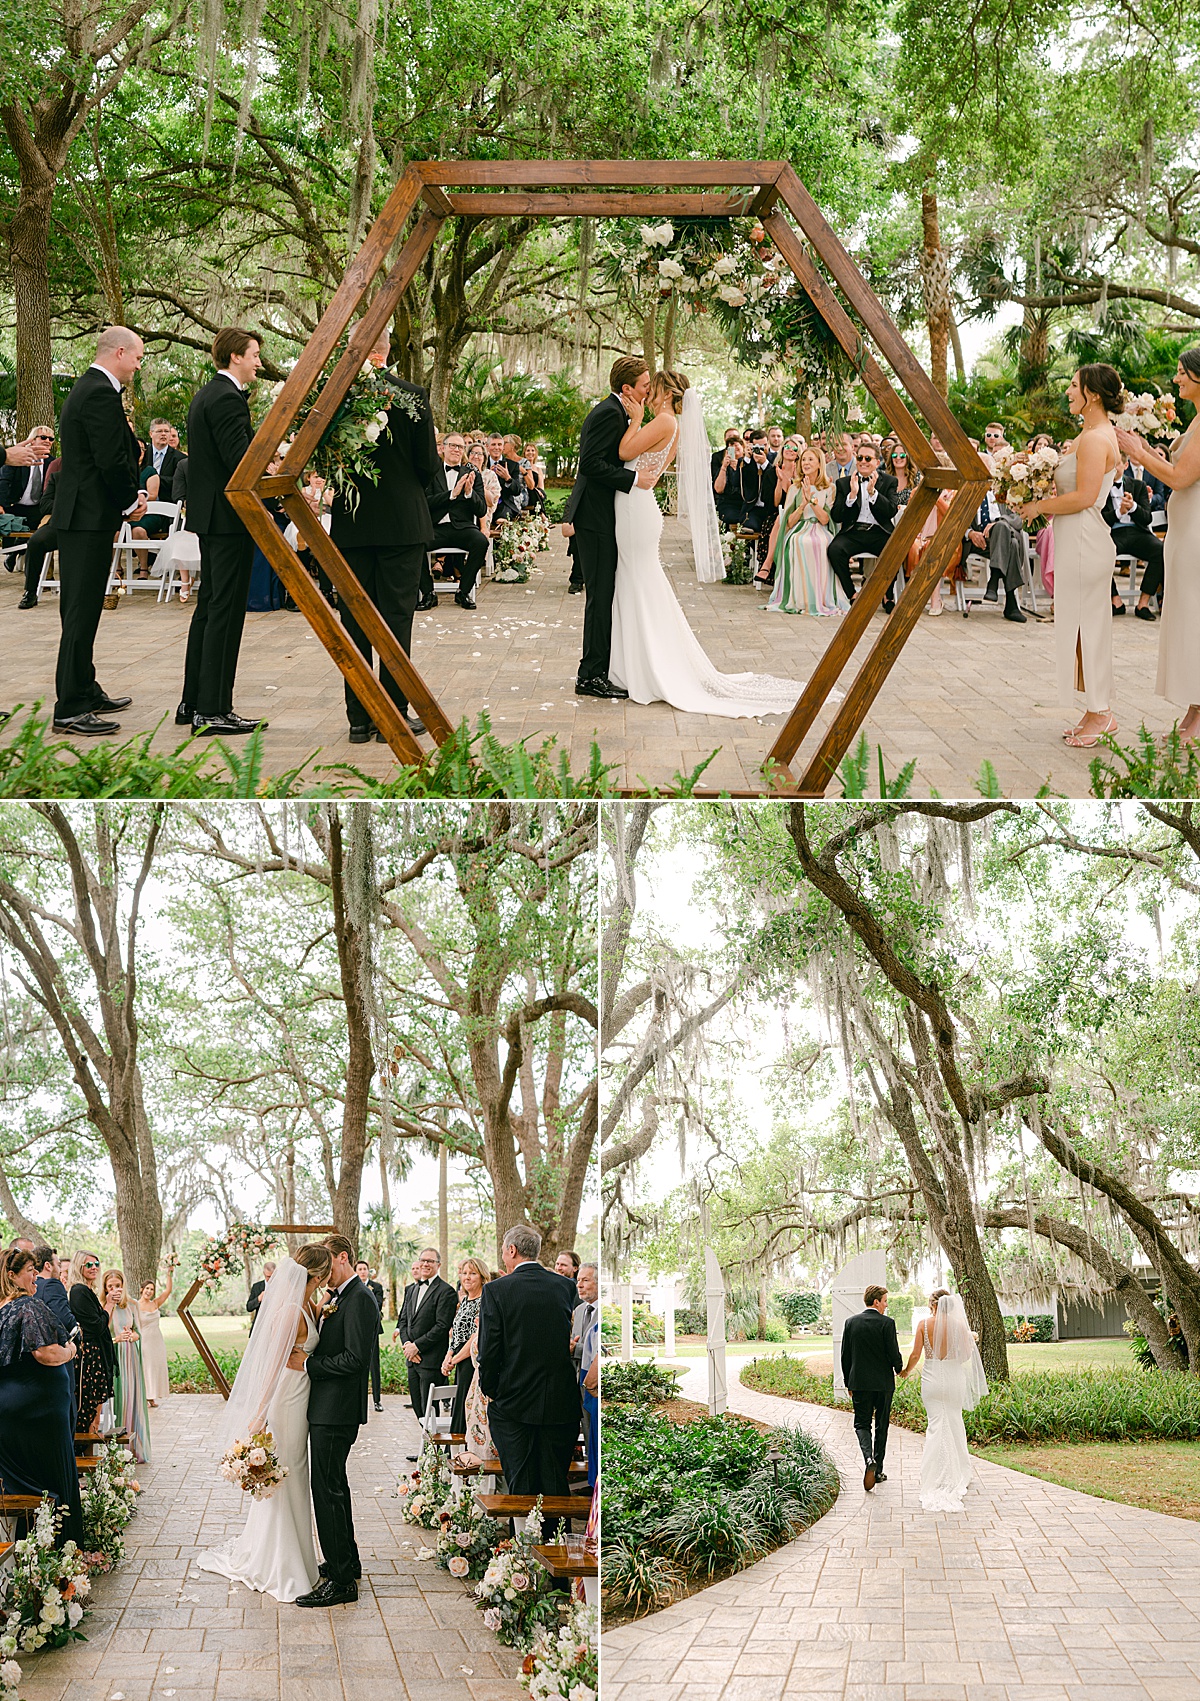 Bride and groom first kiss at their outdoor destination wedding ceremony in Malabar, Florida.